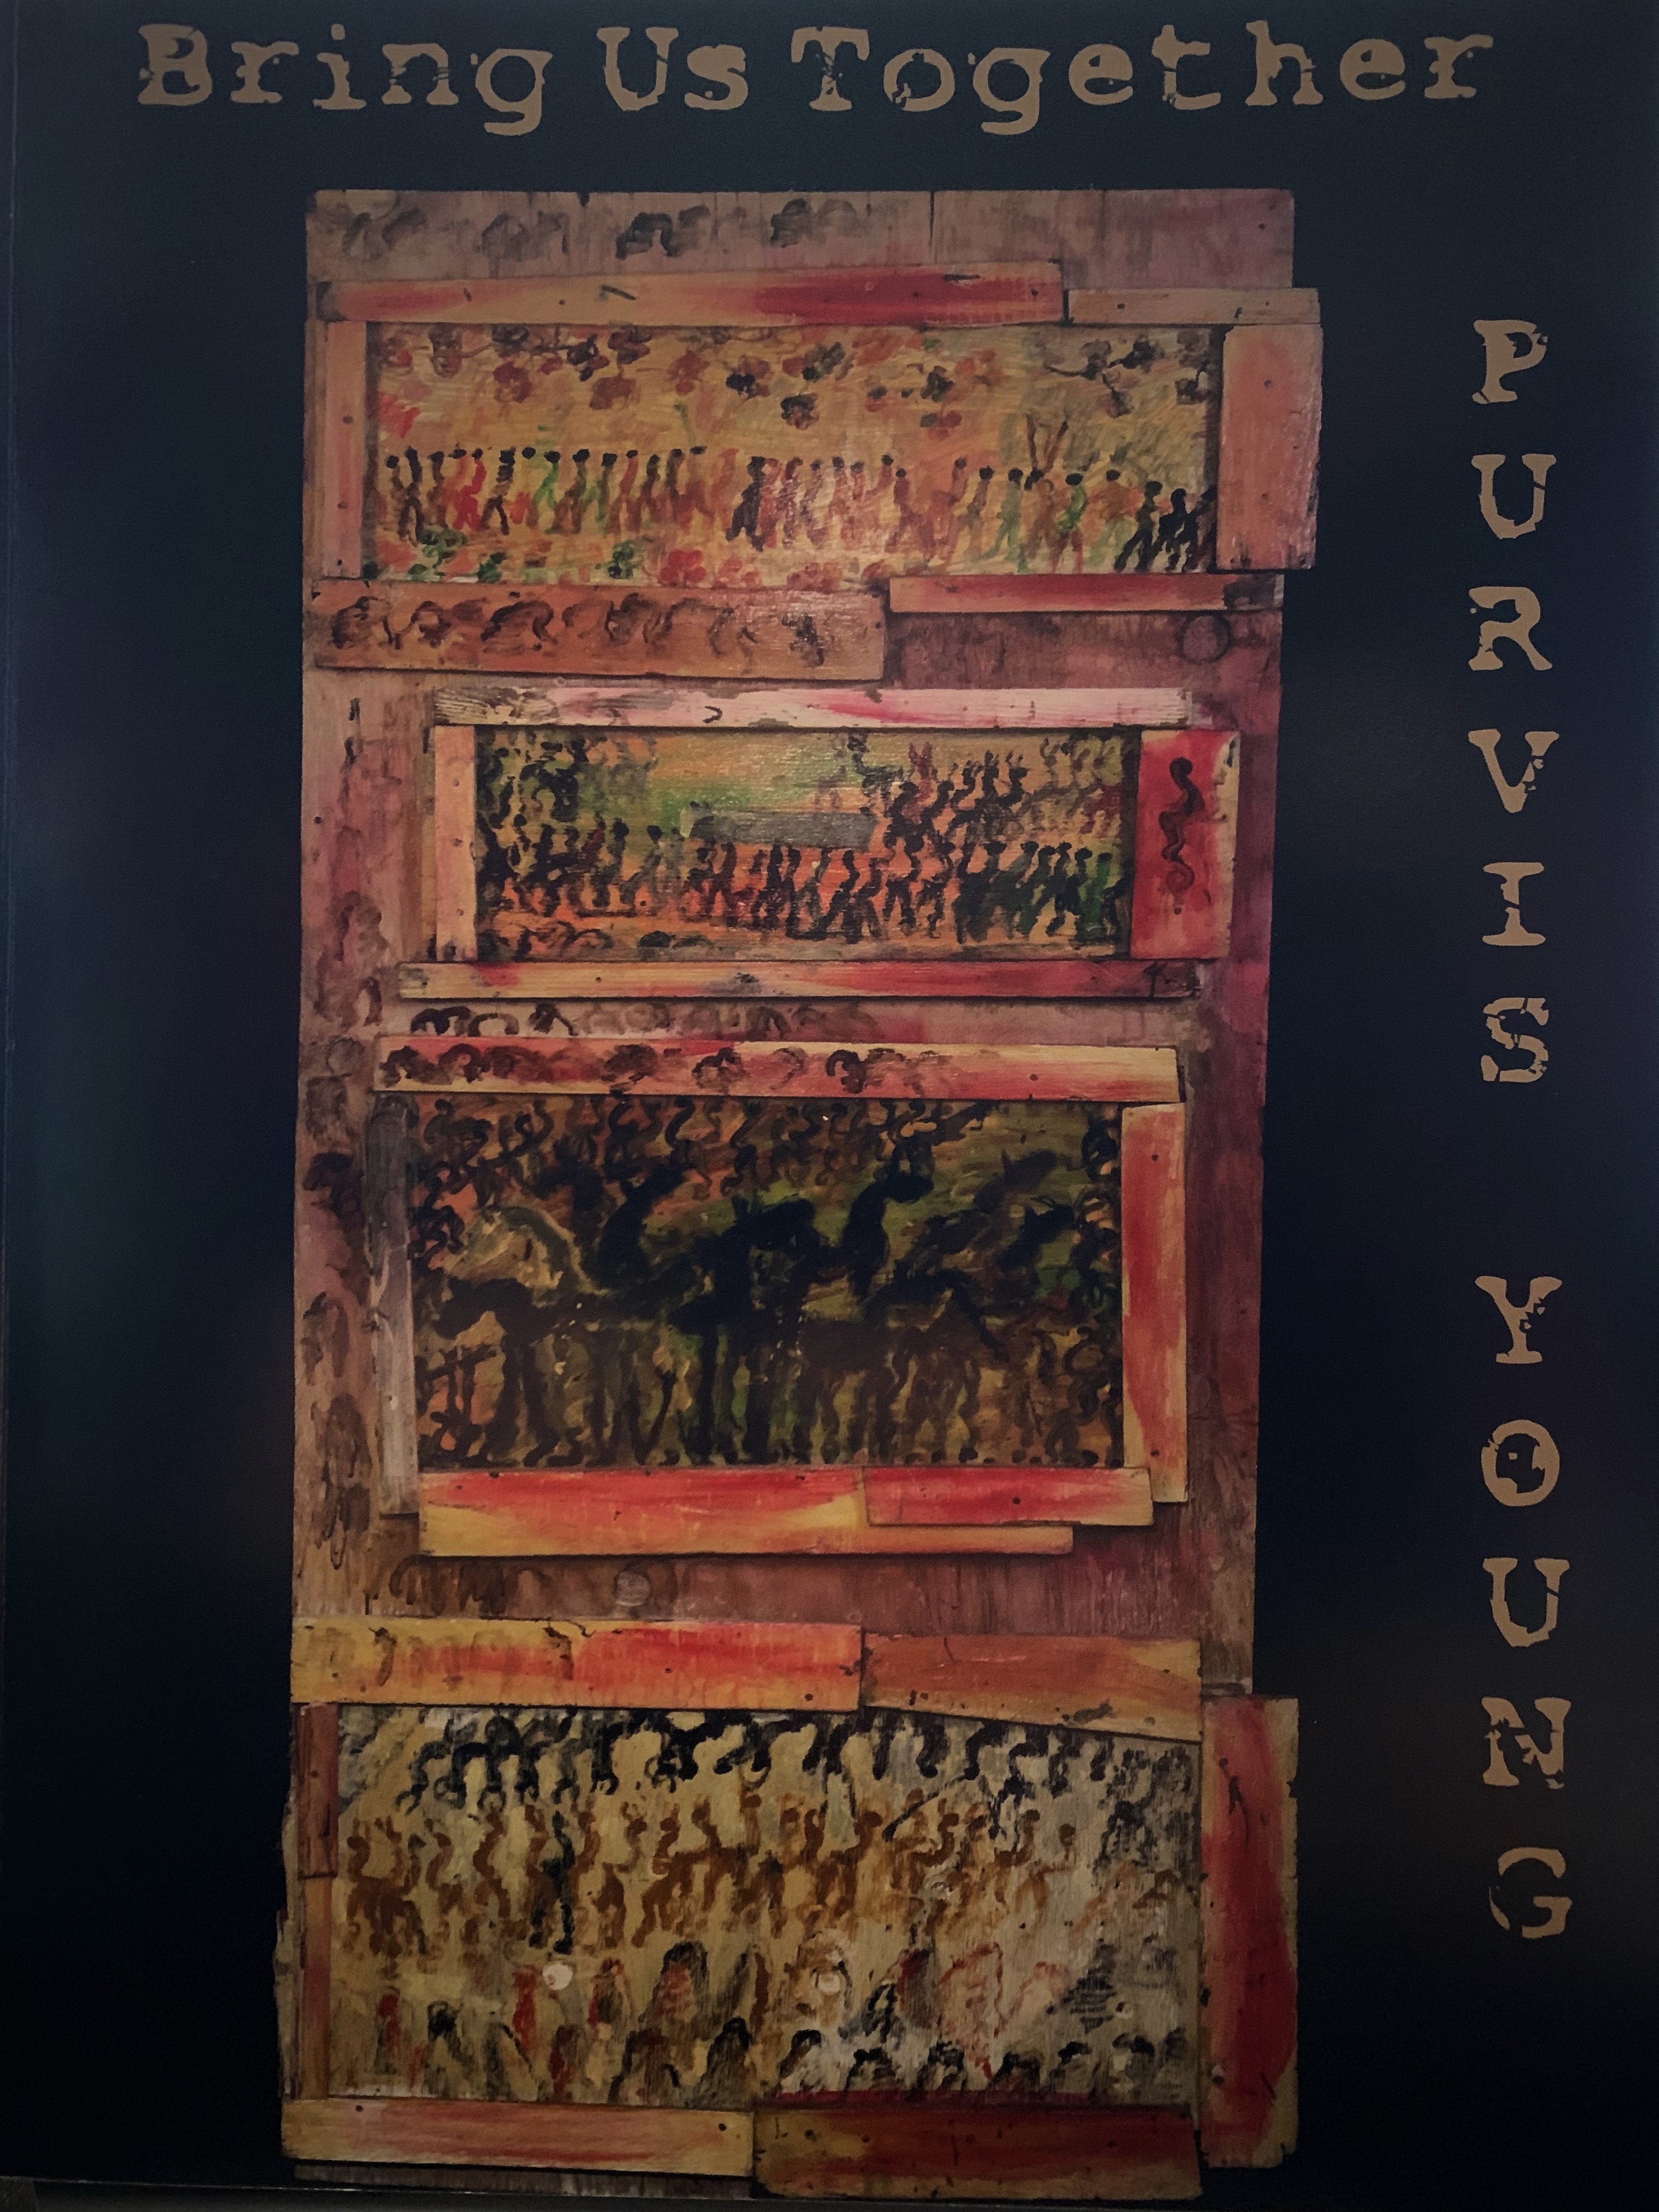 Bring Us Together | Purvis Young Exhibition catalog